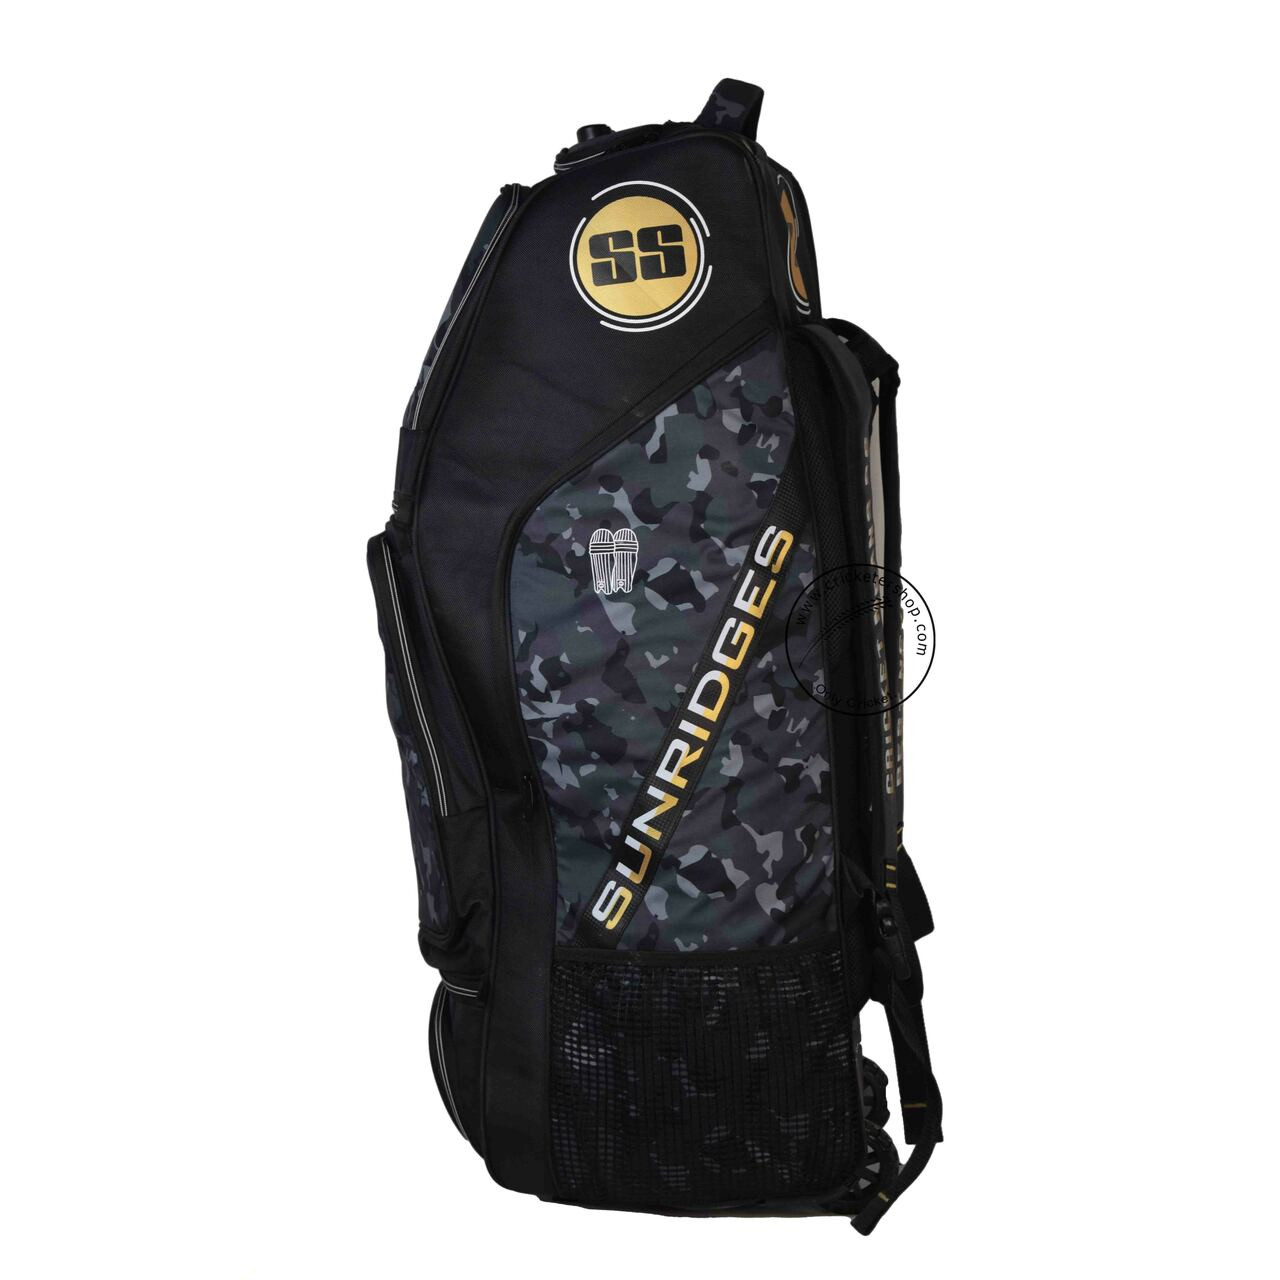 SS Premium Cricket Kit Bag with Shoulder Strap| Large Size Full Kit Bag |  Buy Online at Authorised Store | 3 Tyre Wheels|